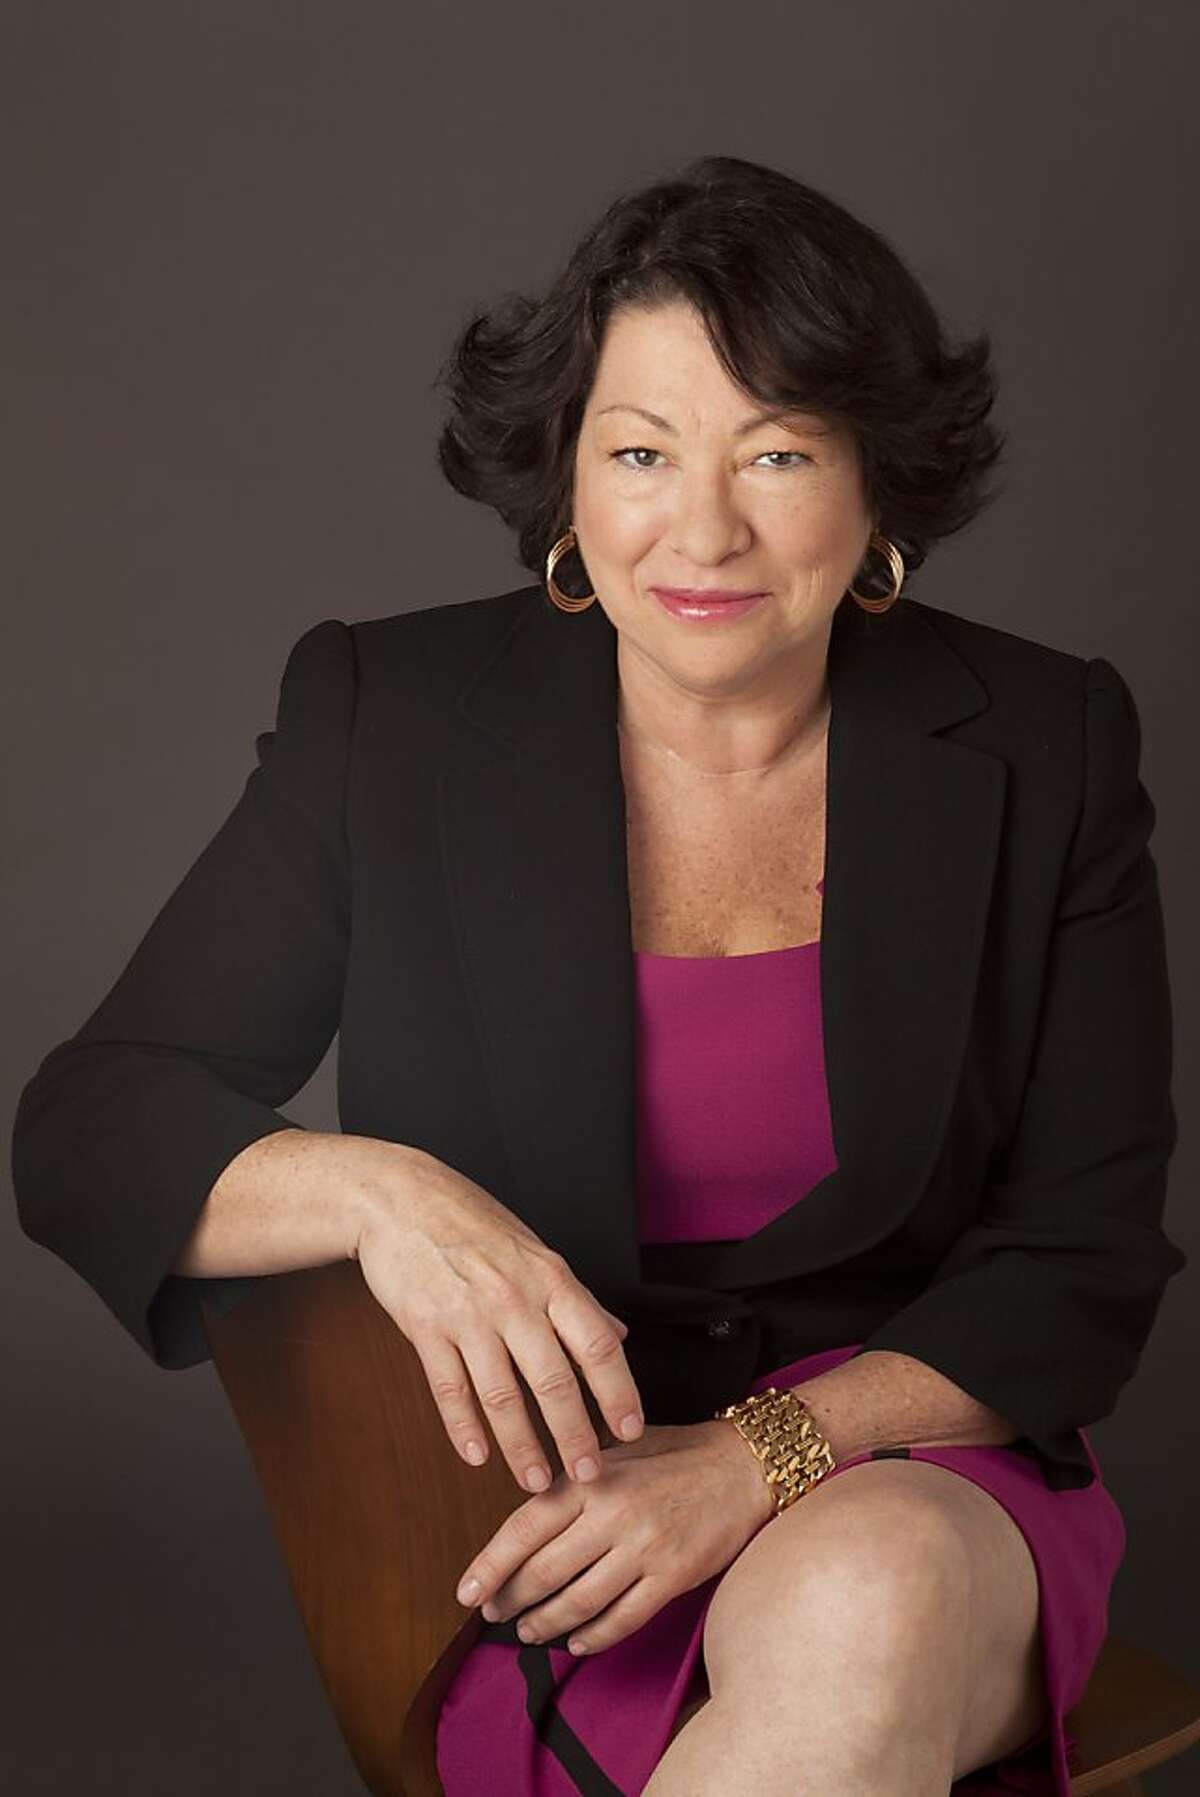 An undated handout photo of Supreme Court Justice Sonia Sotomayor. Sotomayor's memoir, "My Beloved World," is described as a searching and emotionally intimate account of her life, a contrast to her legal writings, which have been described by reporters as dry, methodical and technical. (Elena Seibert via The New York Times) -- NO SALES; FOR EDITORIAL USE ONLY WITH STORY SLUGGED SOTOMAYOR BOOK REVIEW. ALL OTHER USE PROHIBITED. --